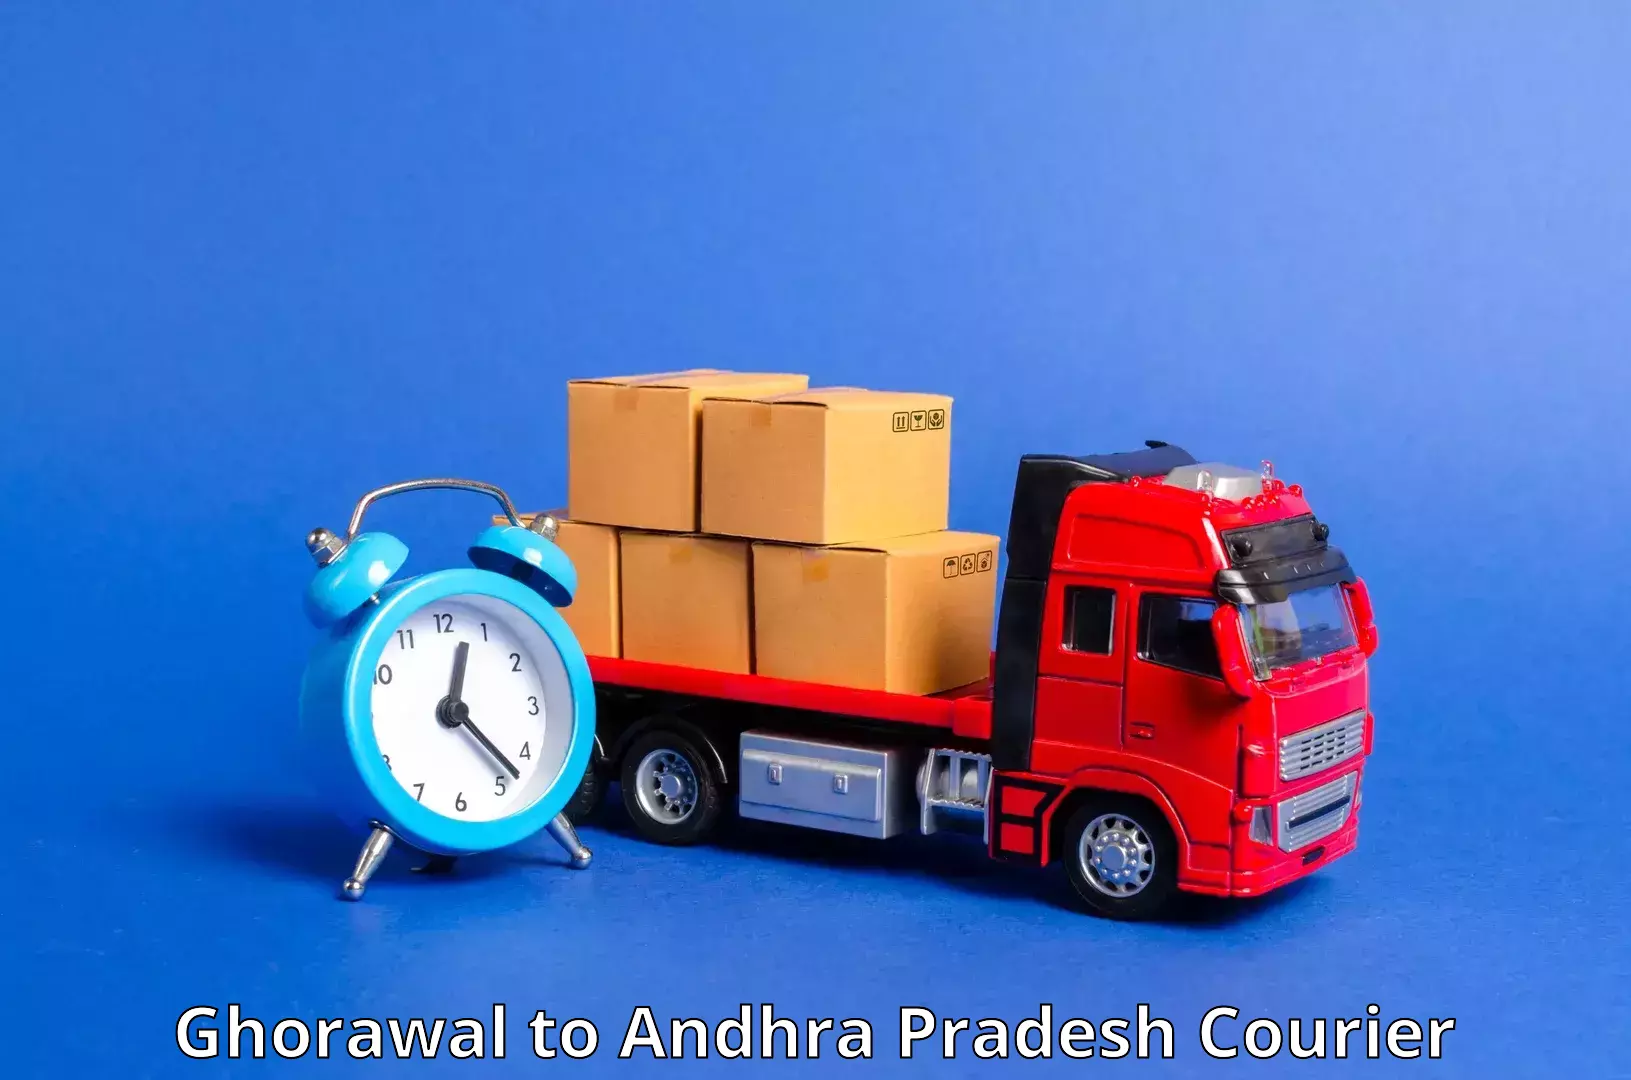 Next-day delivery options in Ghorawal to Palasa